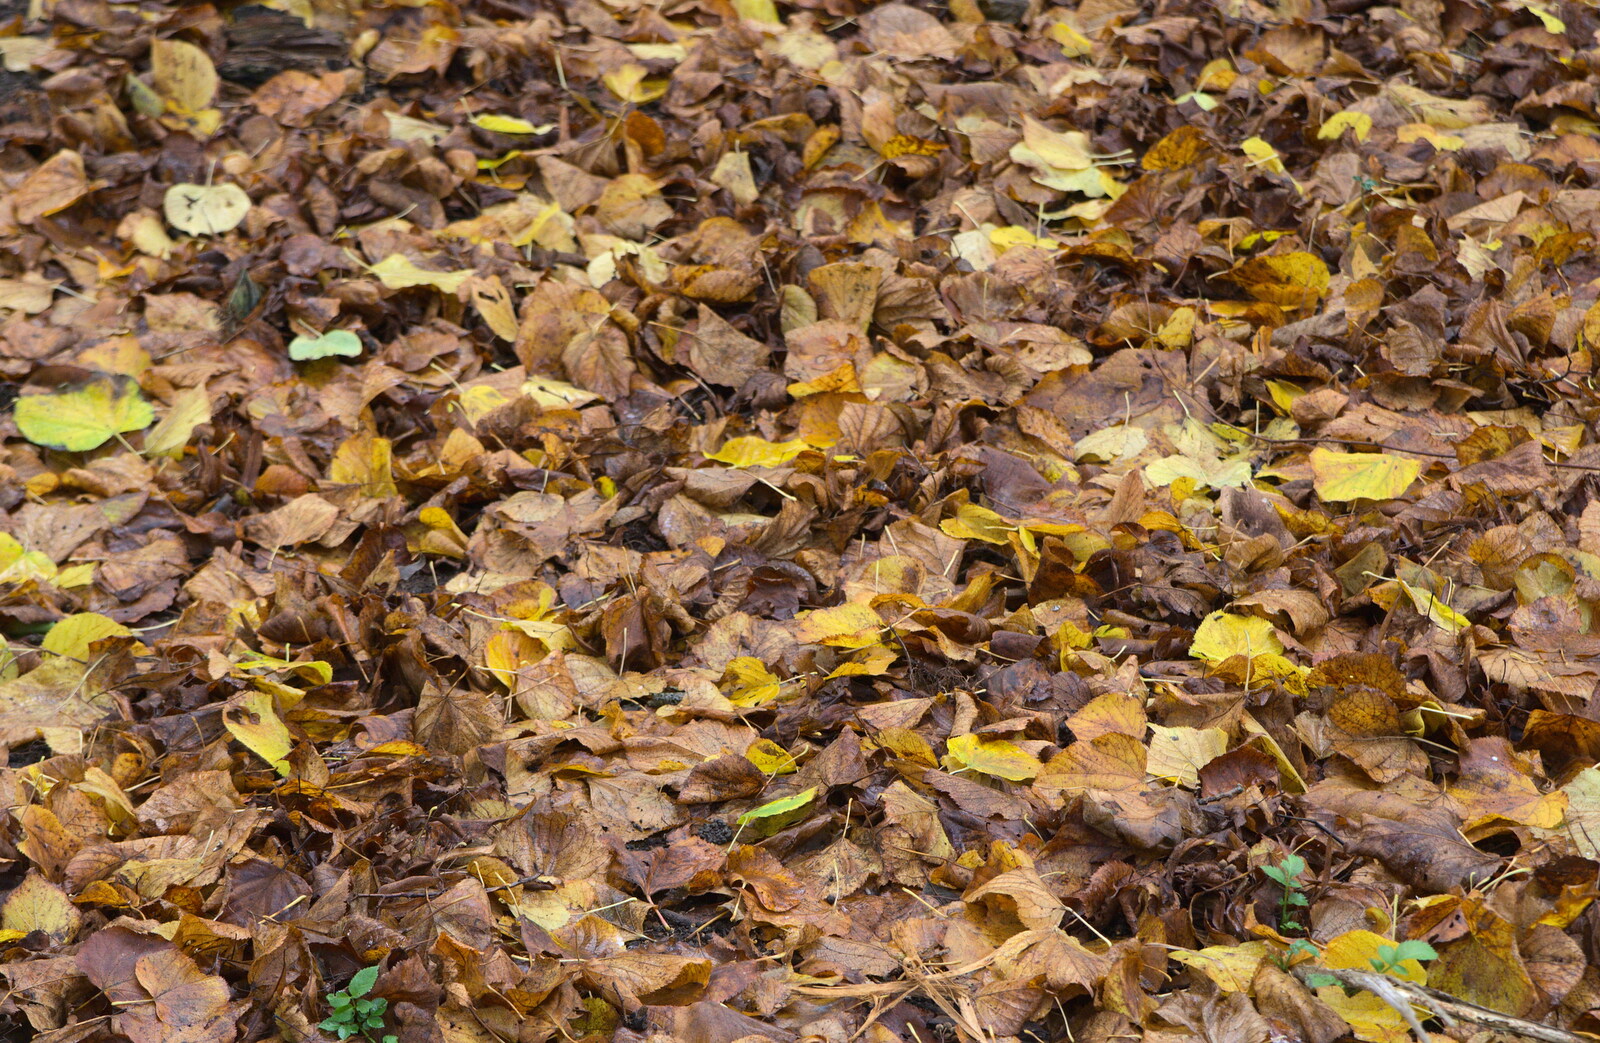 Autumn leaves from The Lorry-Eating Pavement of Diss, Norfolk - 3rd December